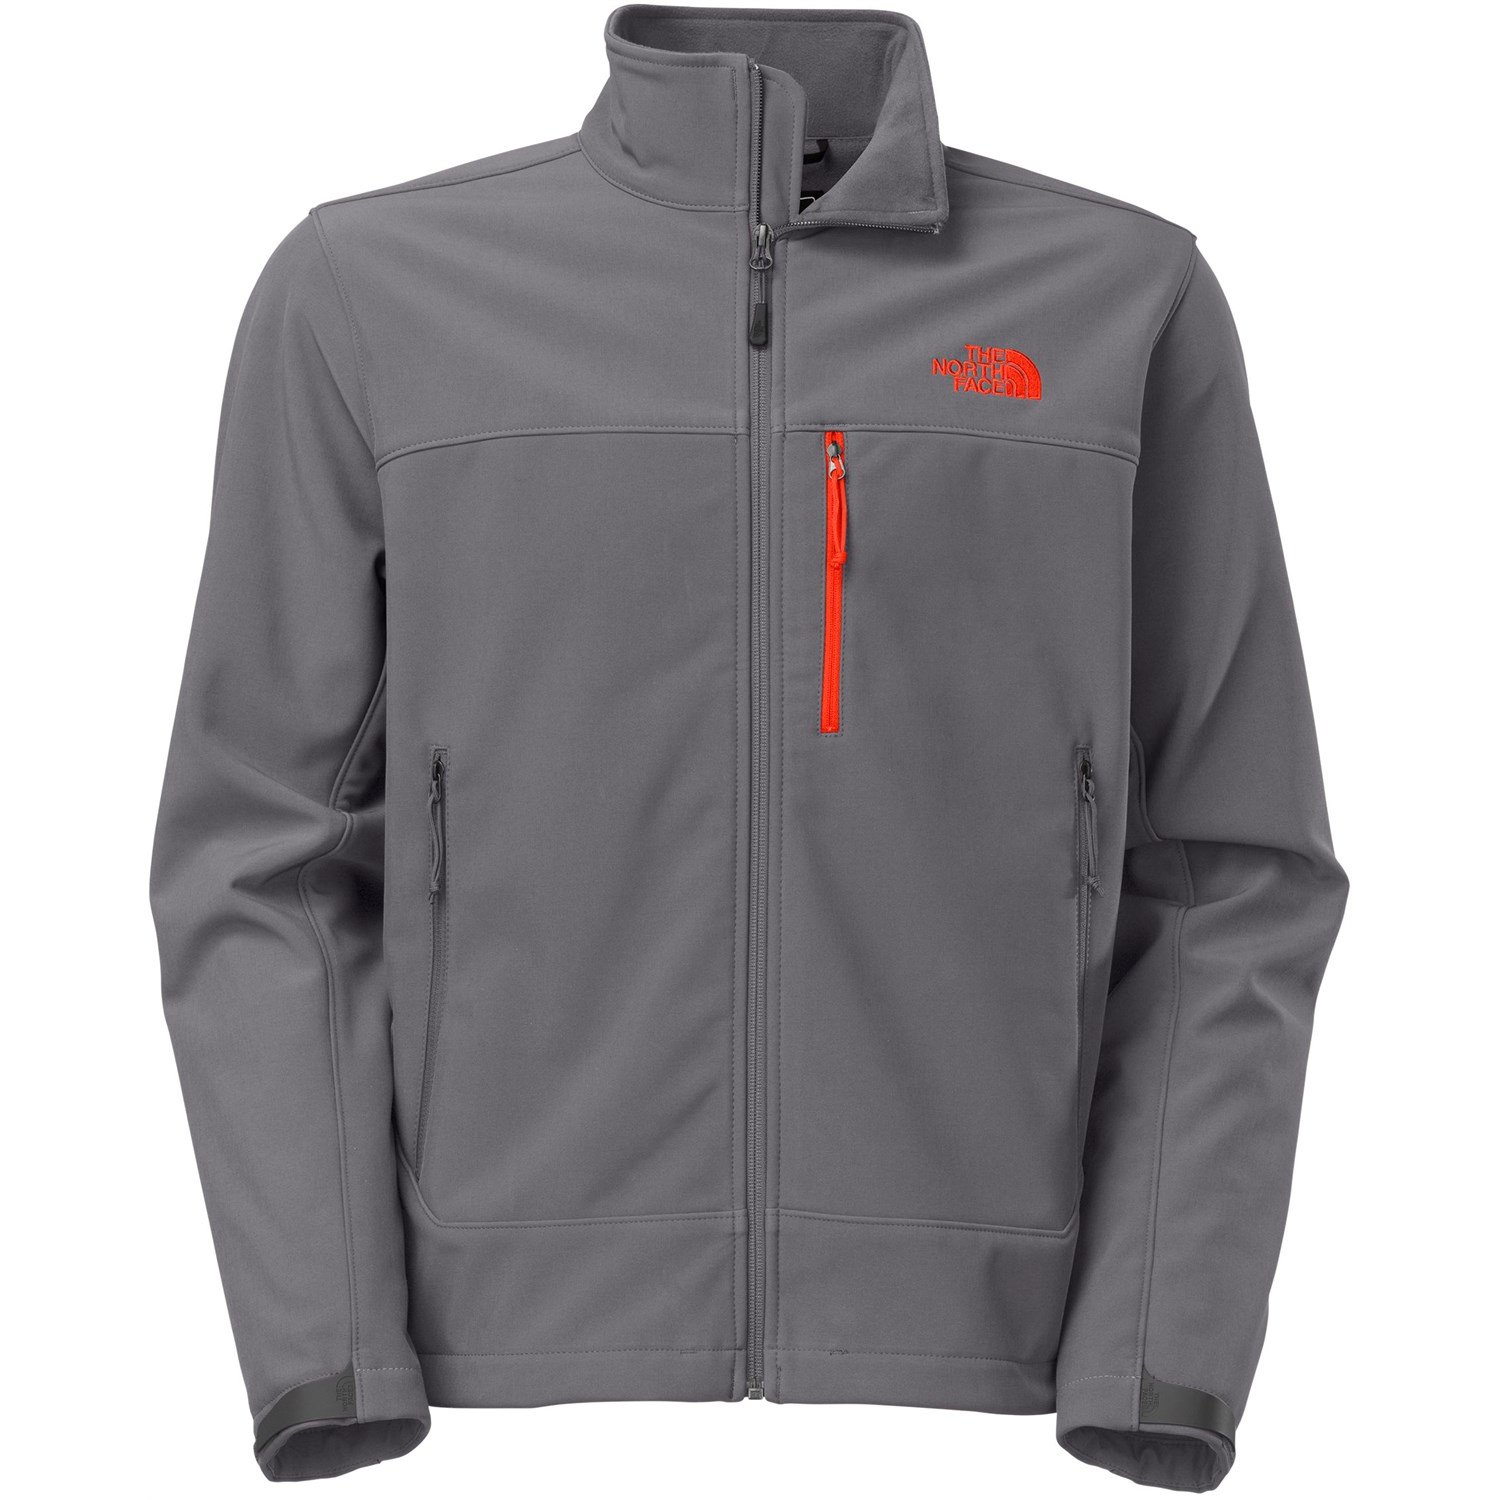 The North Face Apex Bionic Jacket | evo outlet